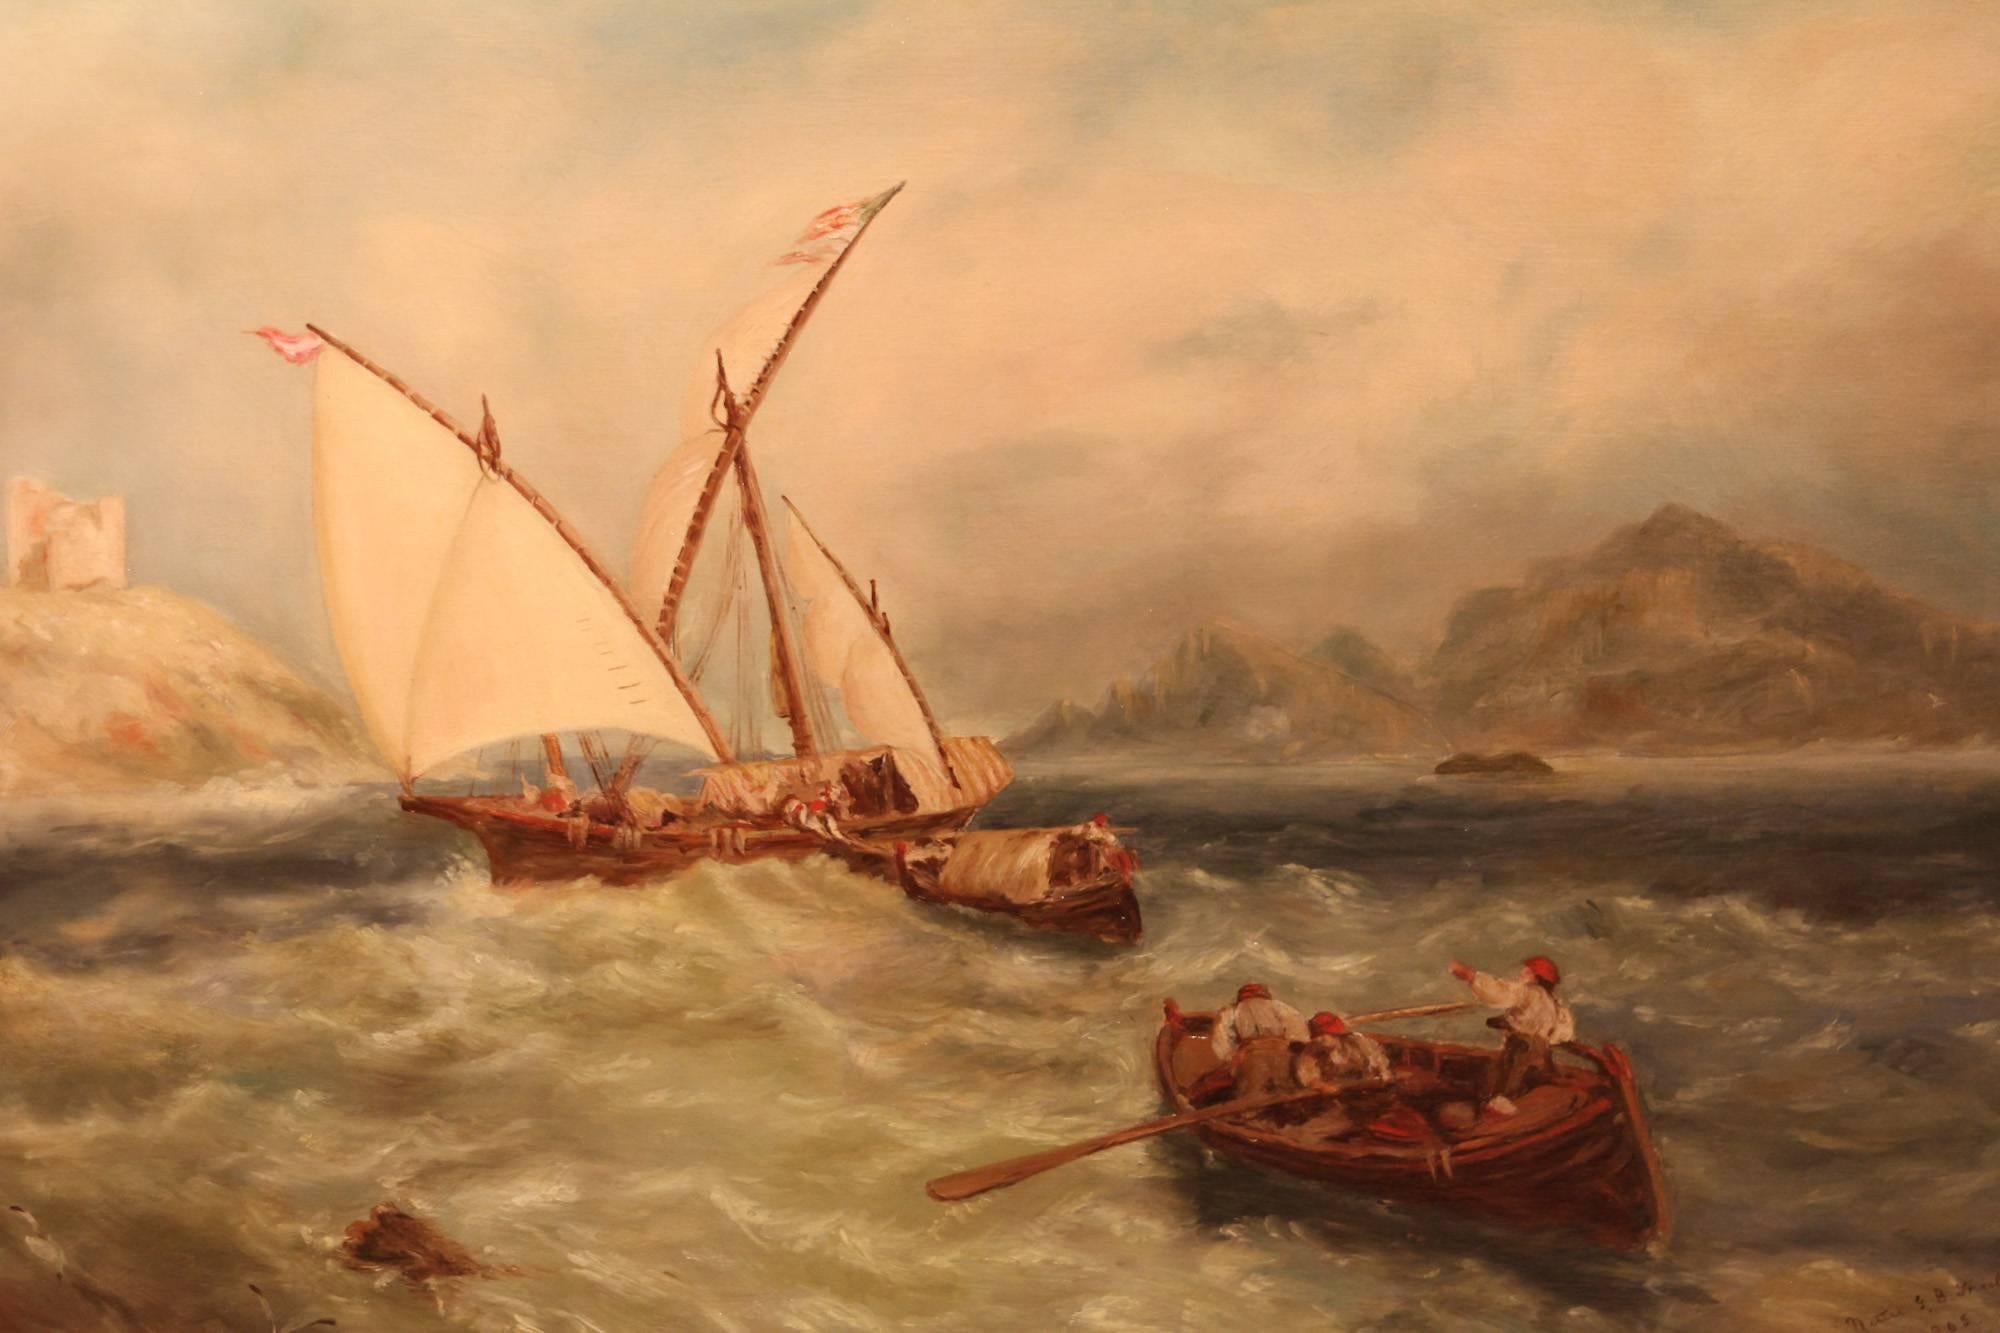 "Scene in the Mediterranean" oil painting by Nettle G.B Shields. Flourished 1895-1910, atmospheric painter of landscape and coastal views. Oil on canvas, 20x30" signed and dated 1905.

All of the items that we advertise for sale